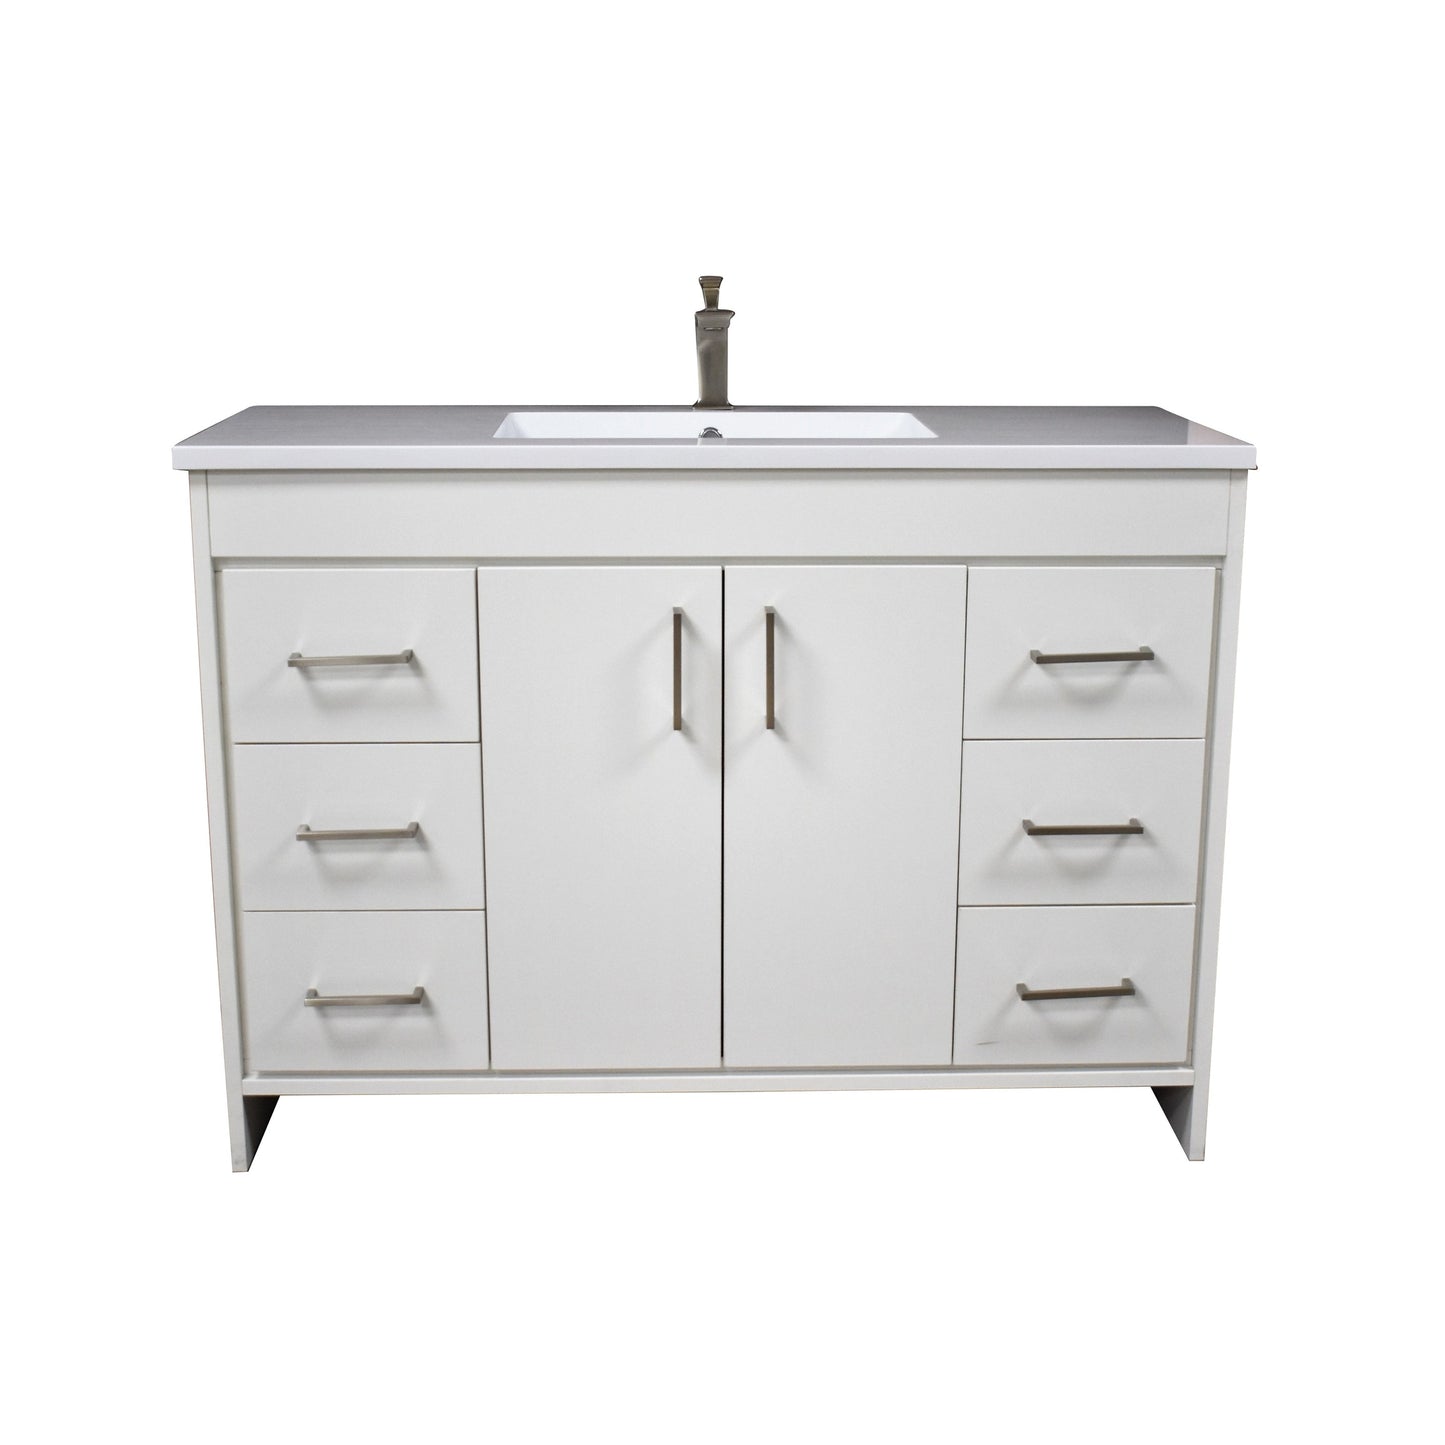 Volpa USA Rio 60" White Freestanding Modern Bathroom Vanity With Integrated Acrylic Single Sink Top and Brushed Nickel Handles